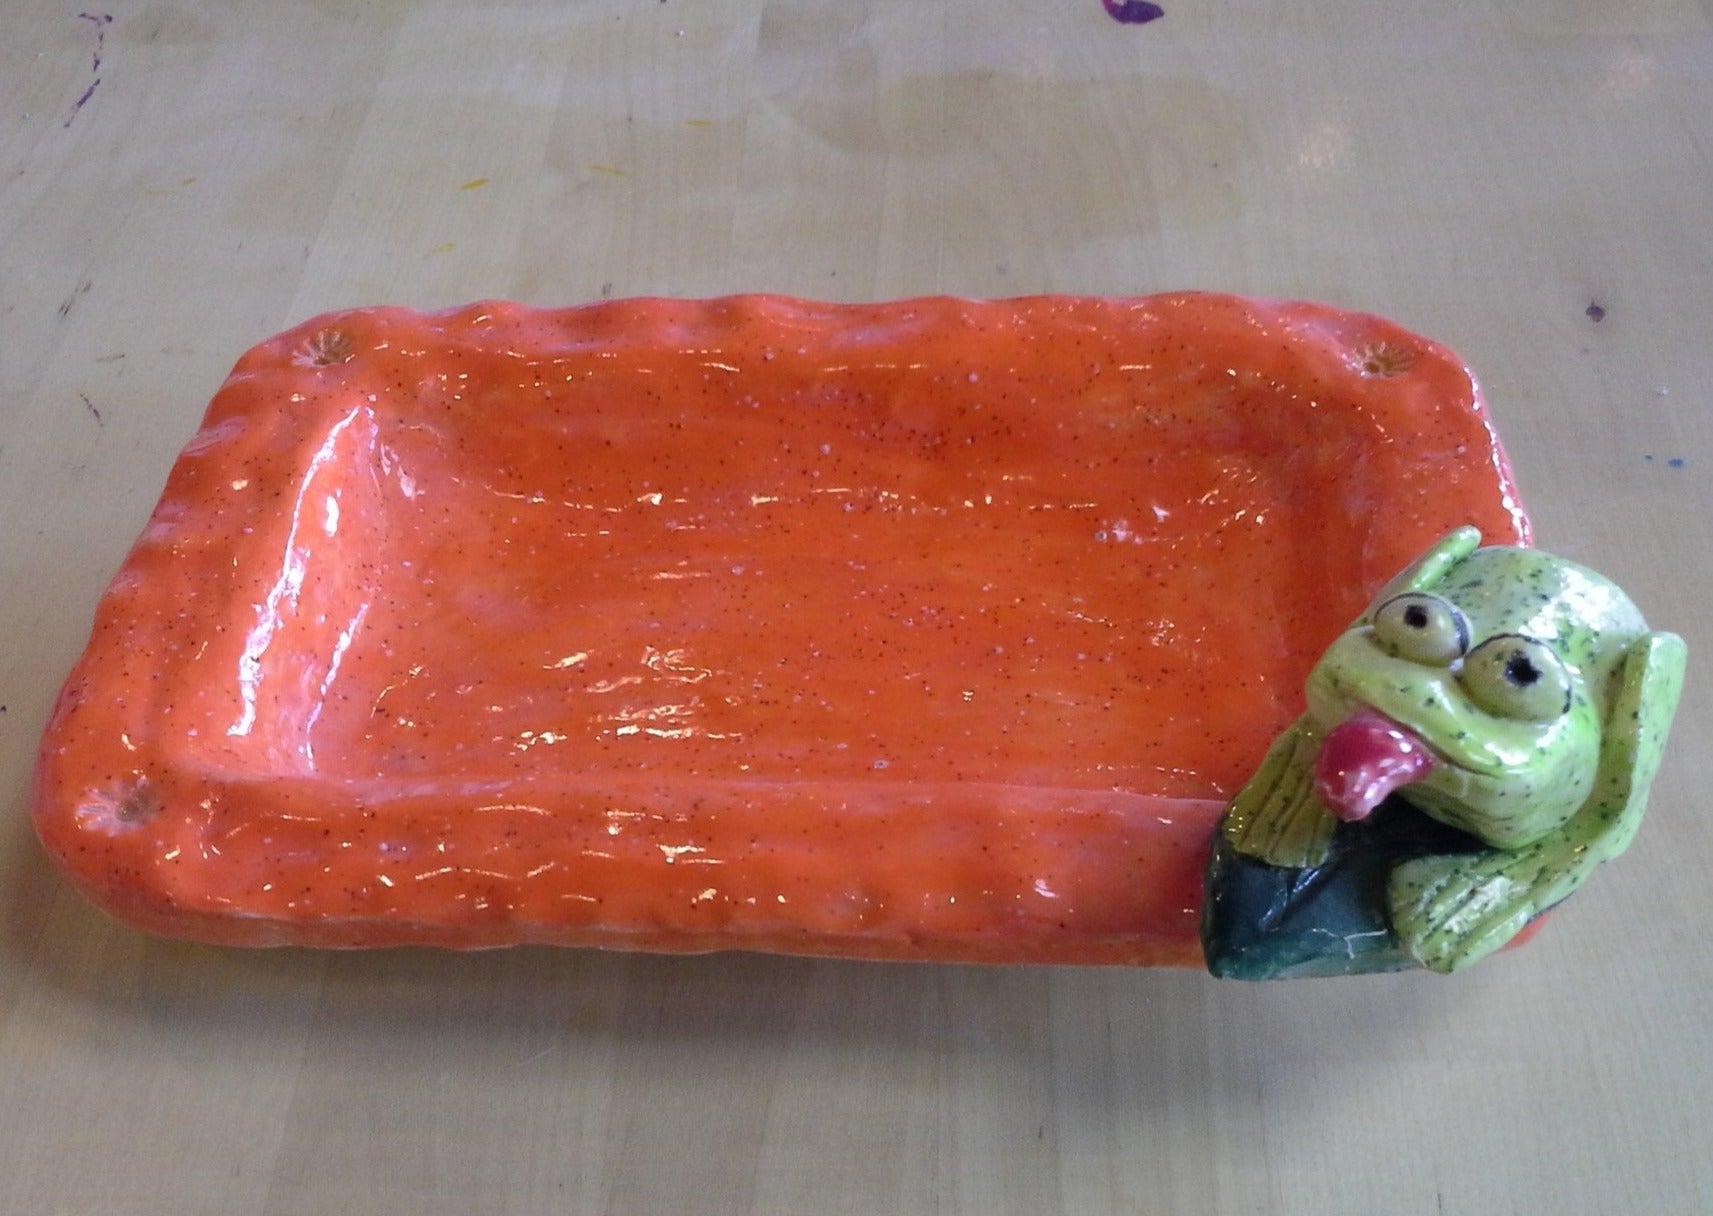 Orange rectangular clay dish with green frog sclupture on the corner sticking out it's tongue